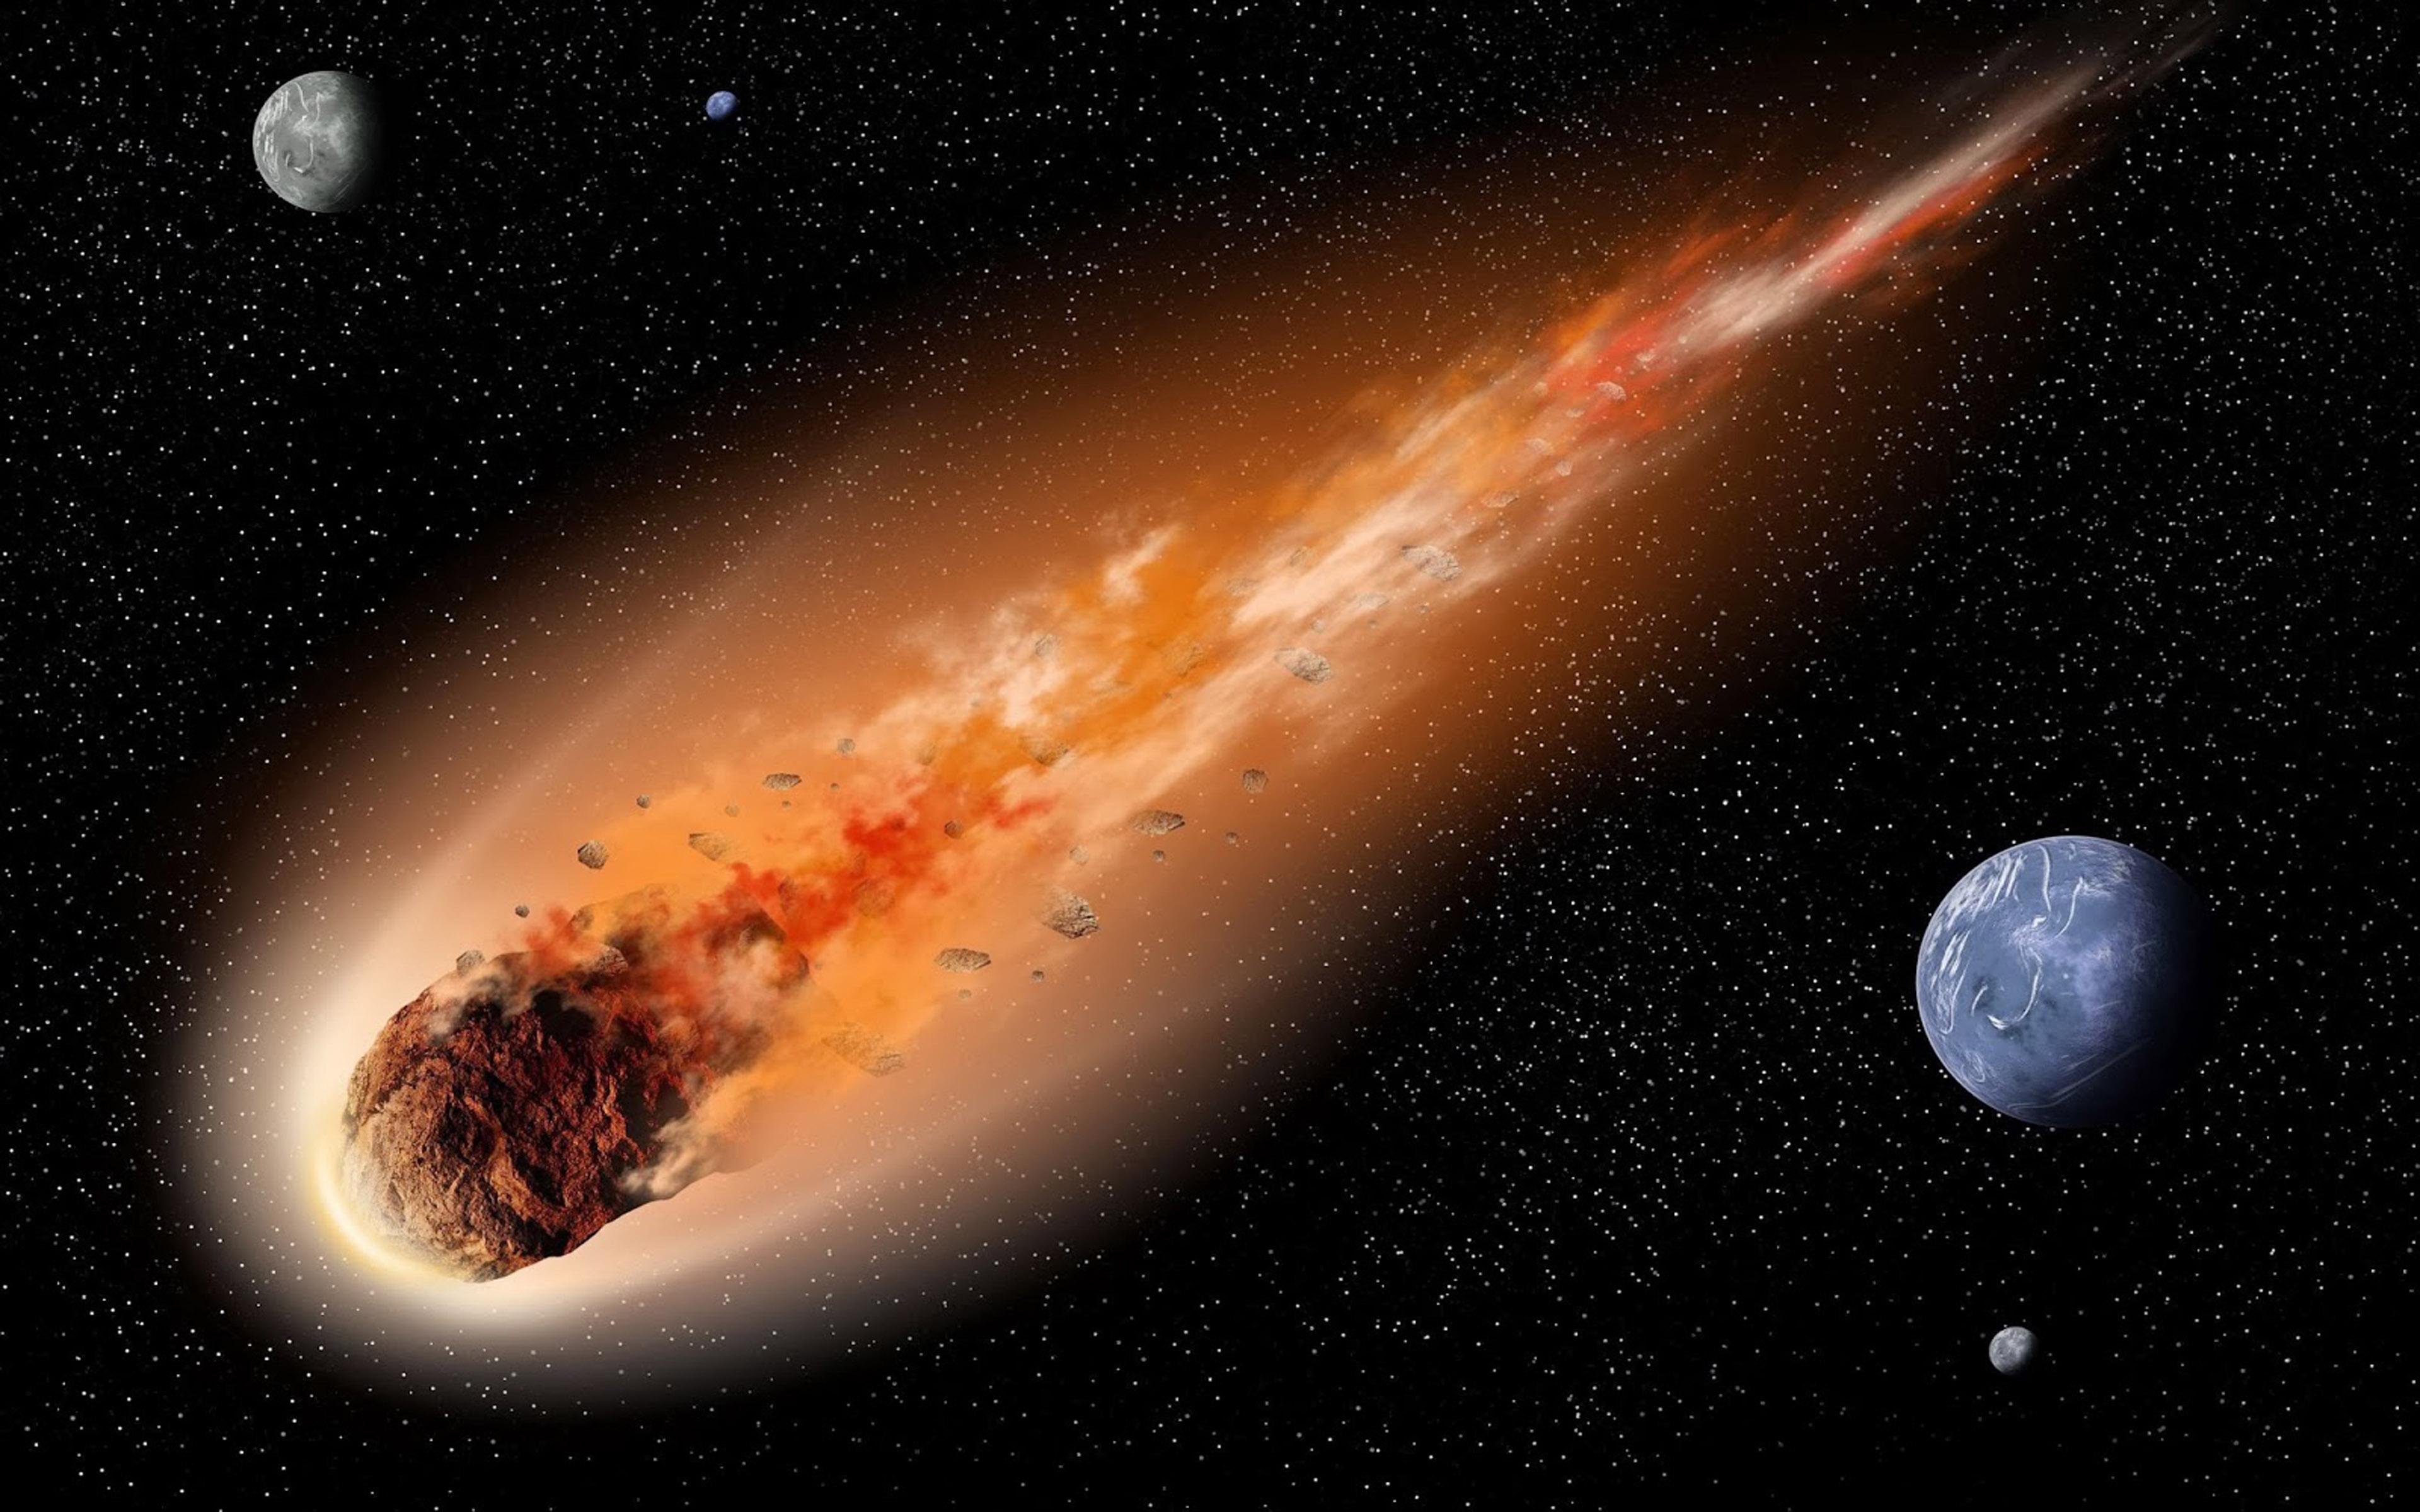 Asteroids are smaller planets made of minerals and rocks orbiting